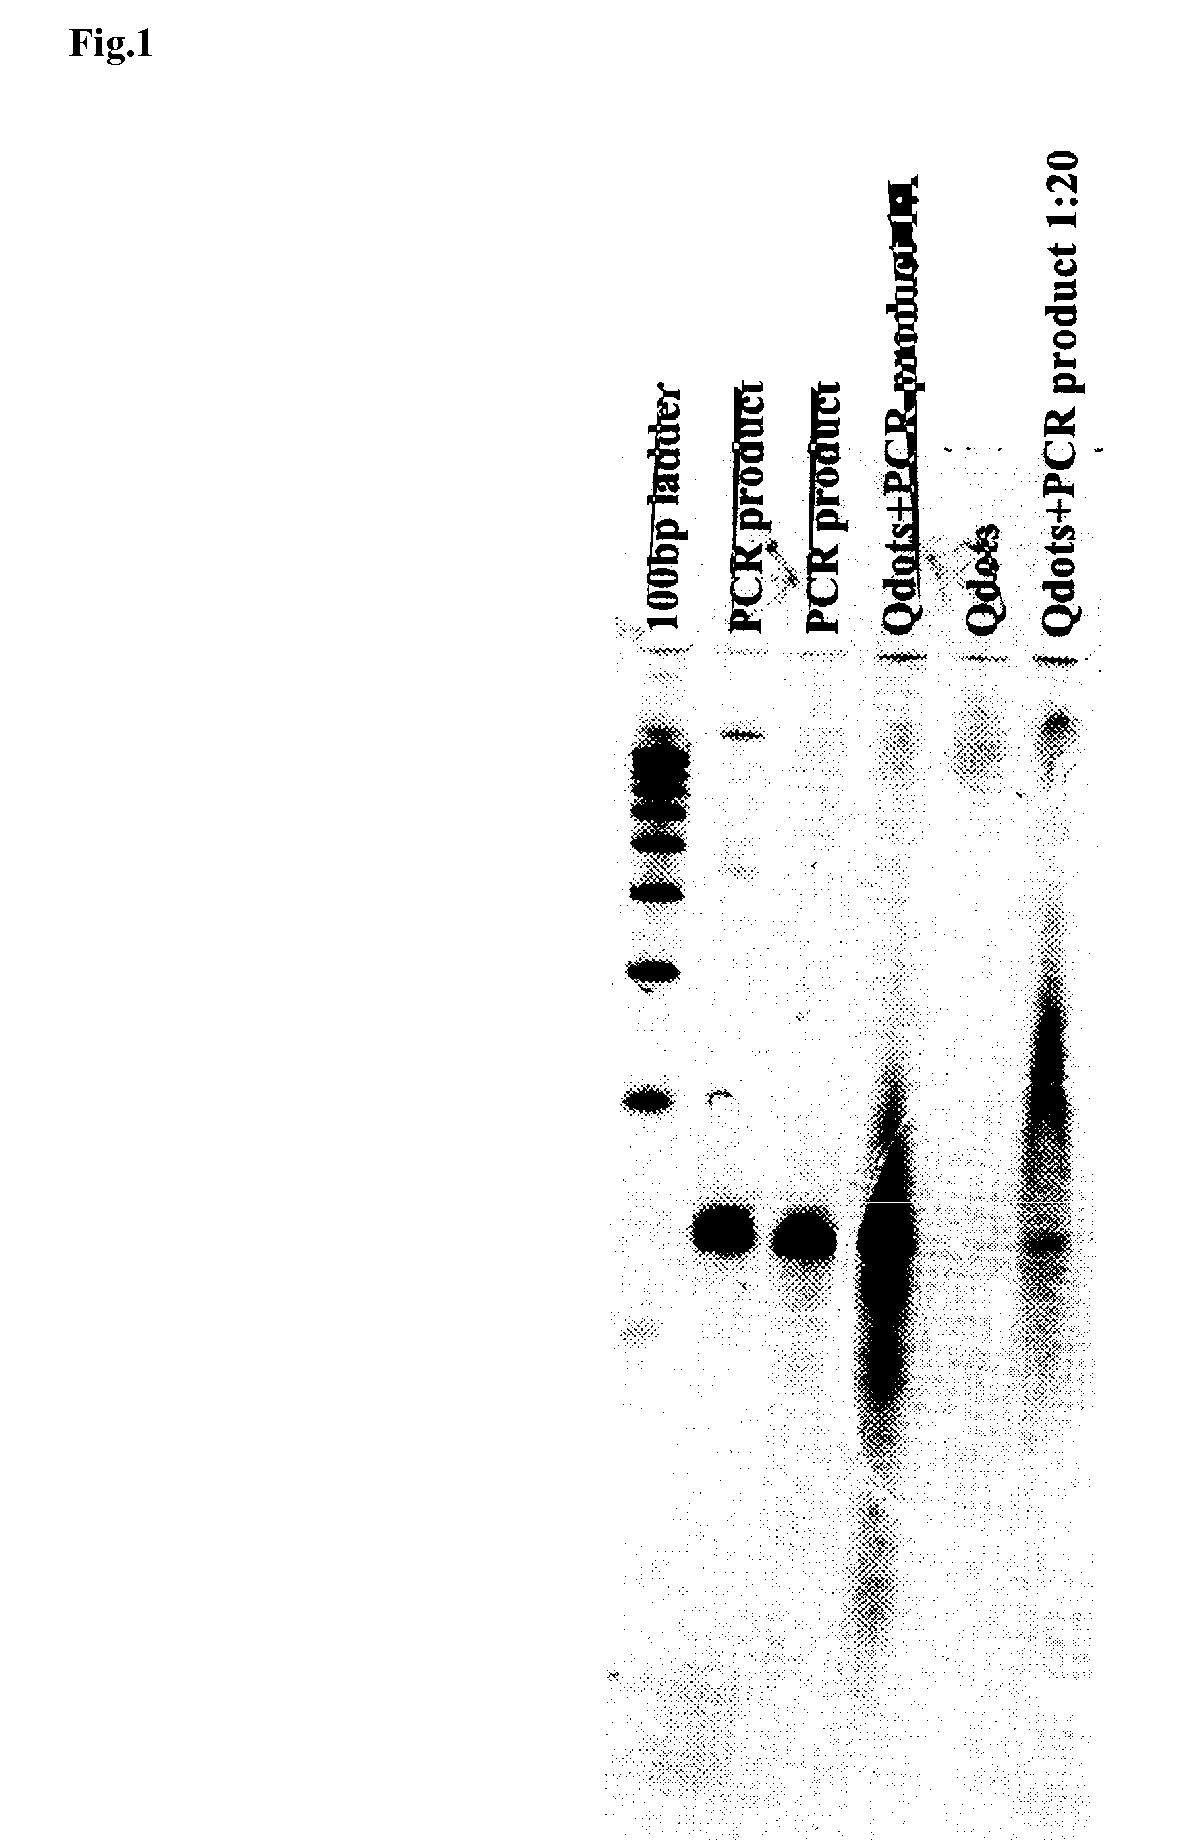 Method for simultaneous analysis of multiple biological reactions or changes in in vivo conditions